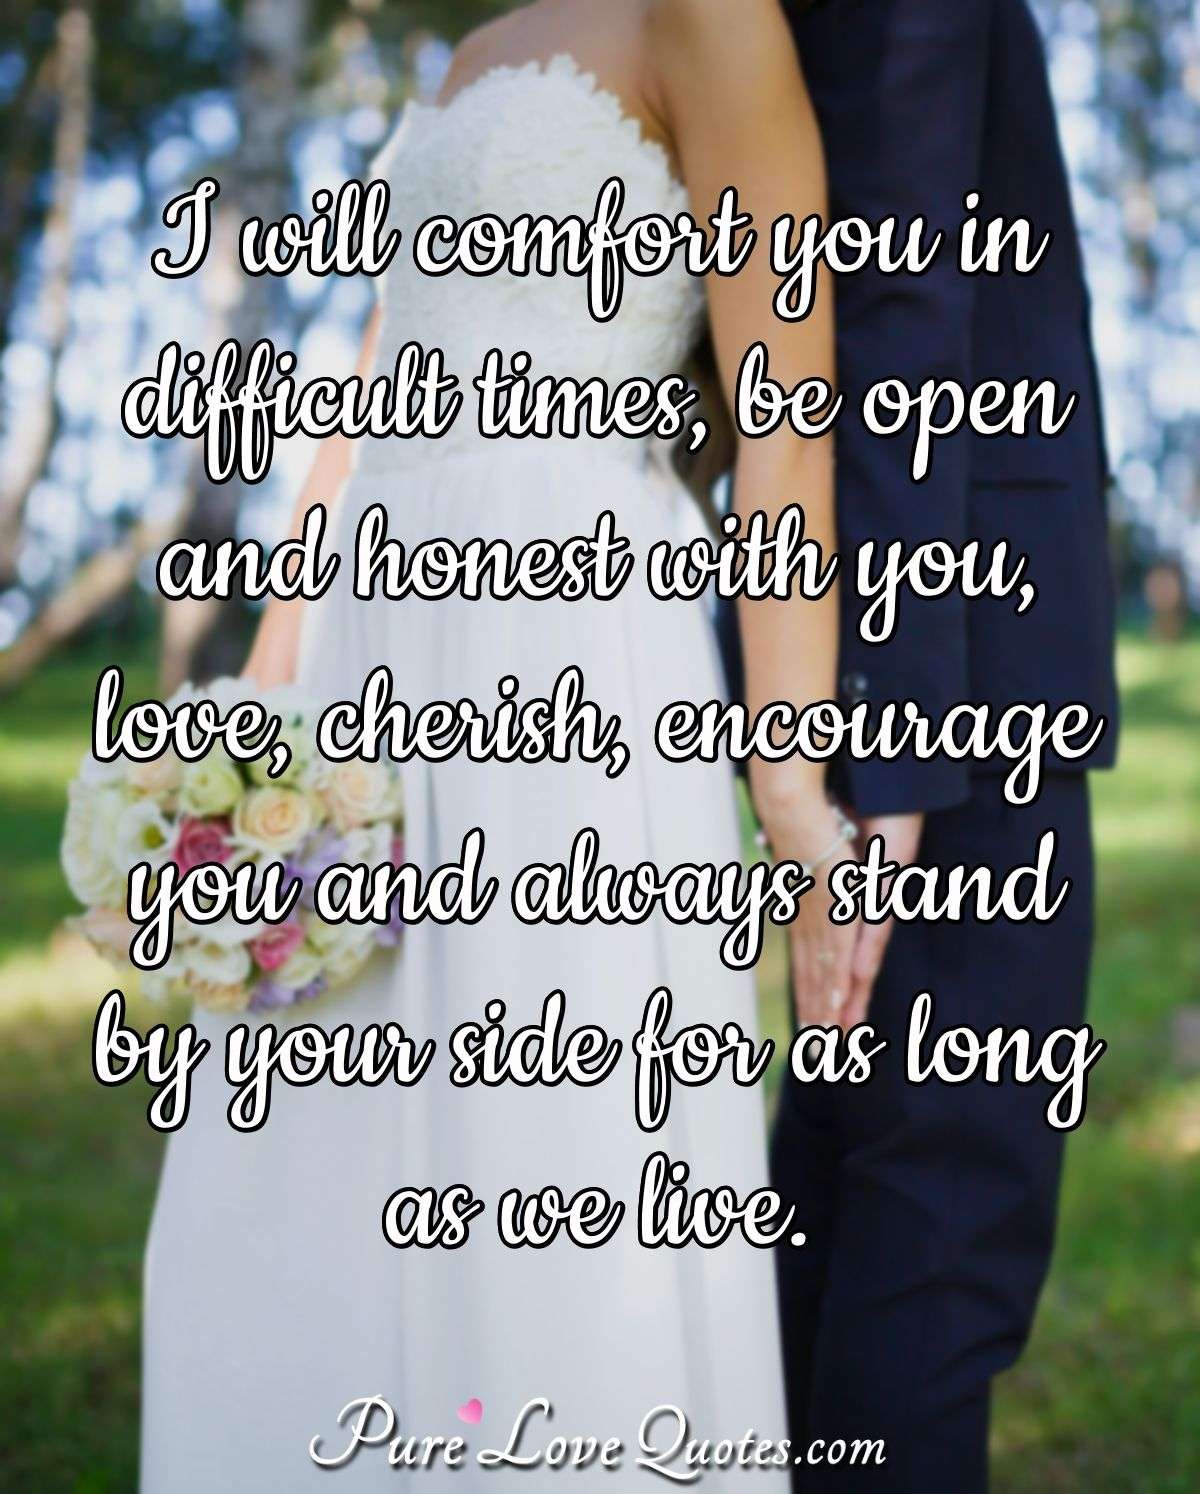 I will comfort you in difficult times, be open and honest with you, love